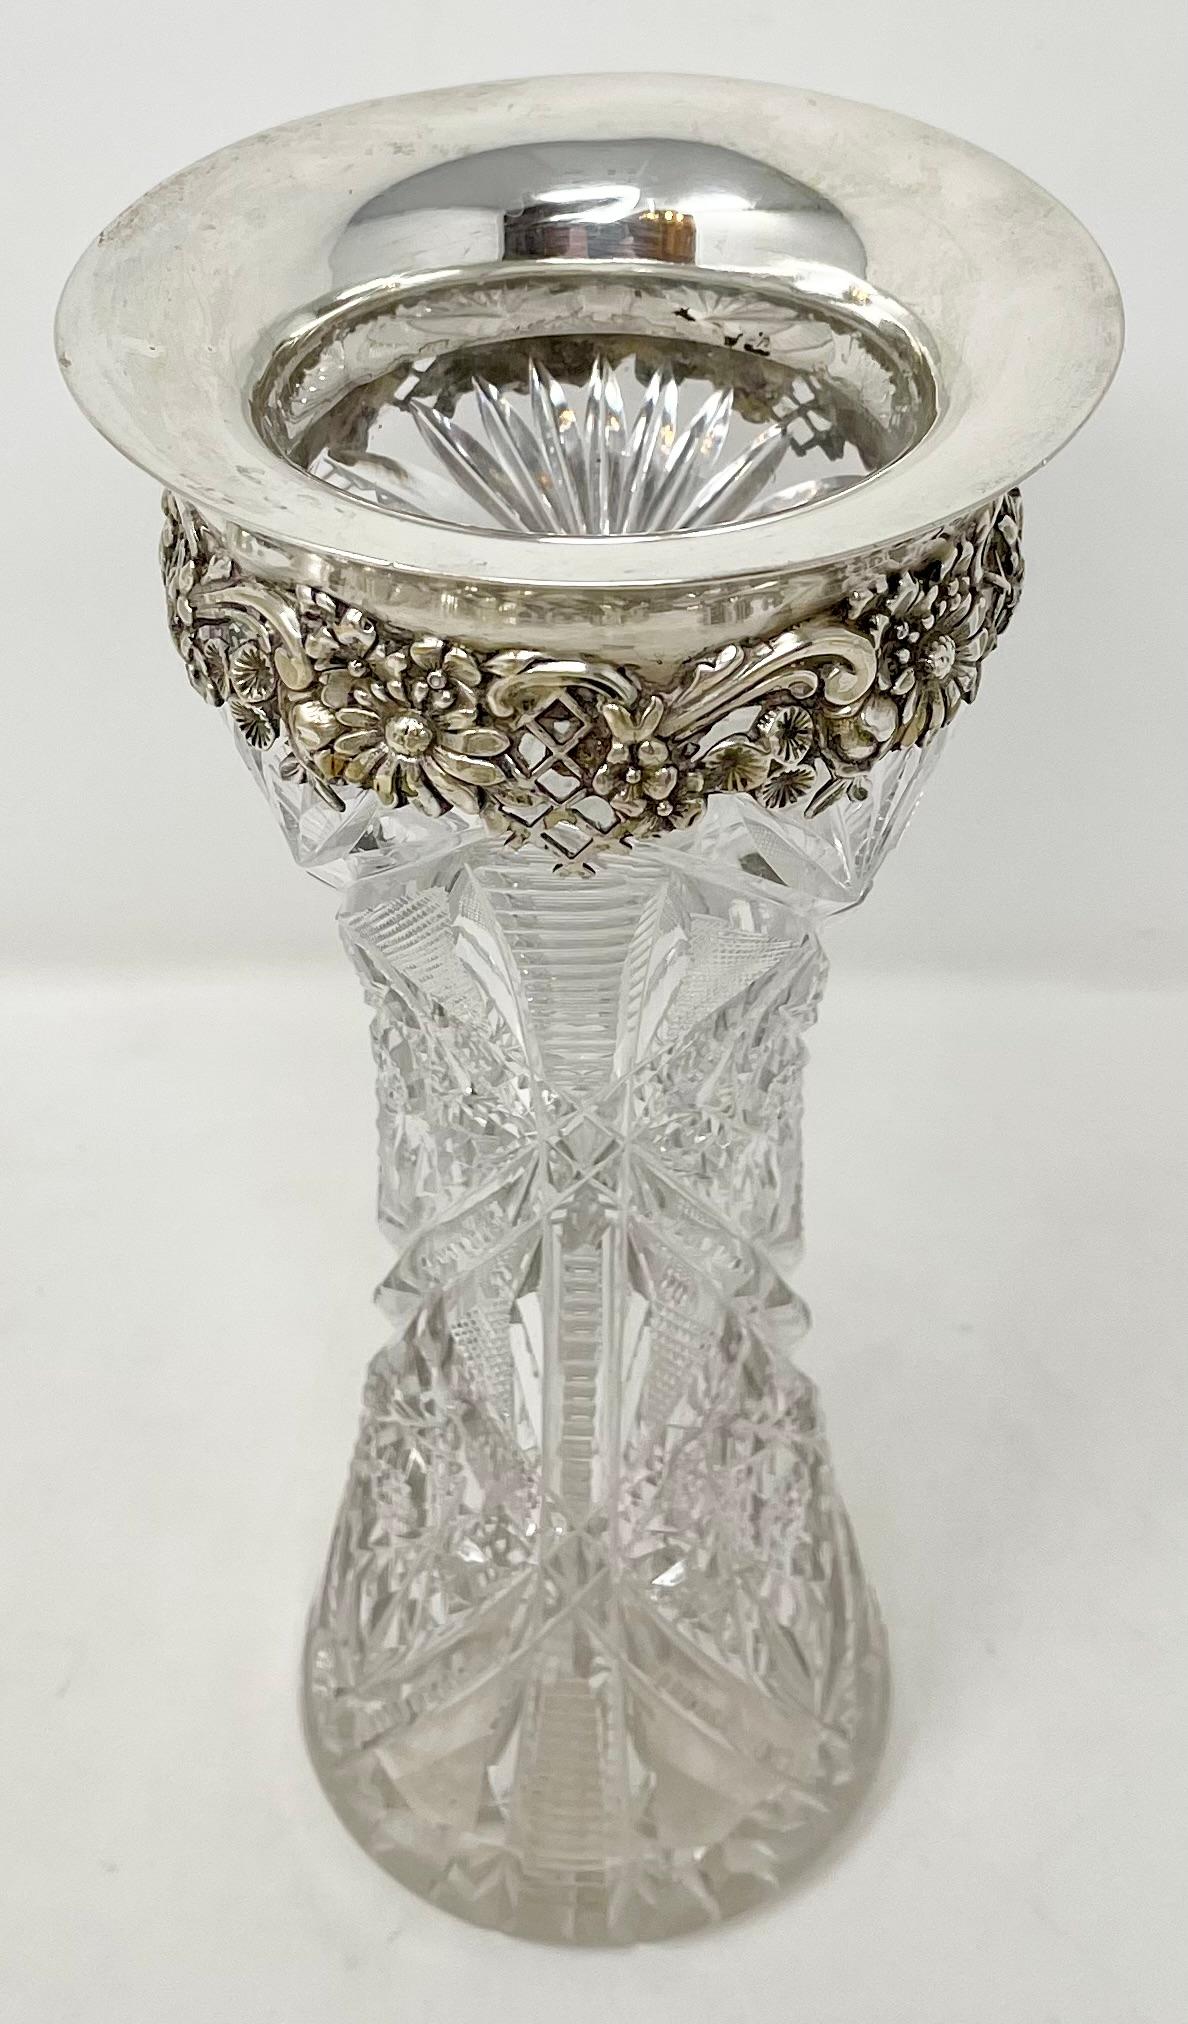 Antique American sterling silver & cut crystal bud vase, circa 1870-1880.
We currently have 2 of these and they are sold individually.